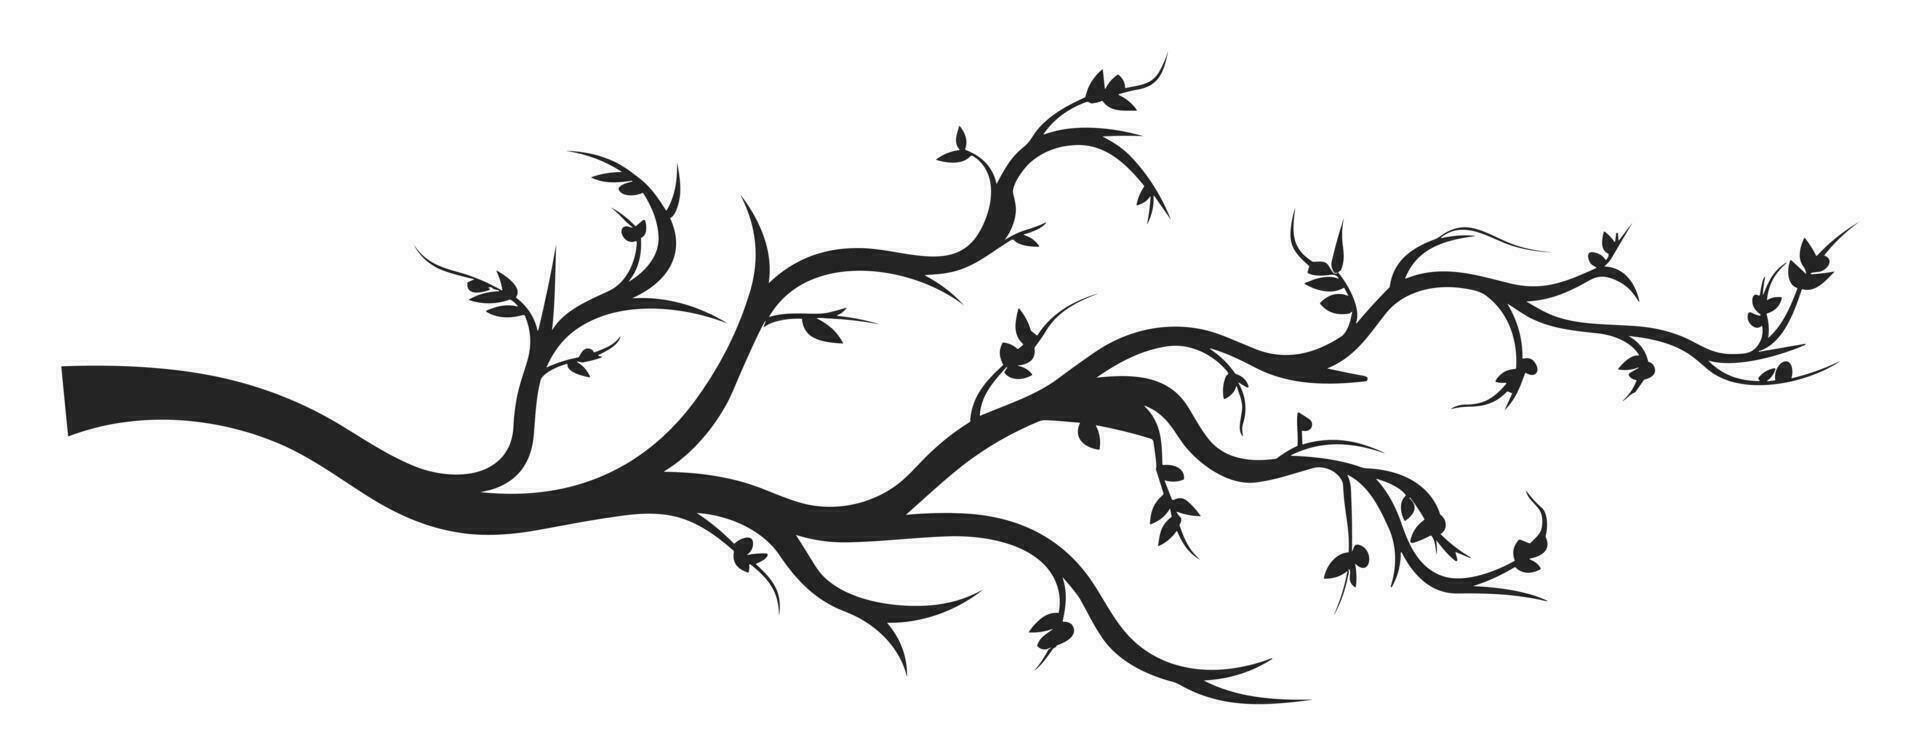 silhouette of tree branch for wall art stickers isolated on white background vector